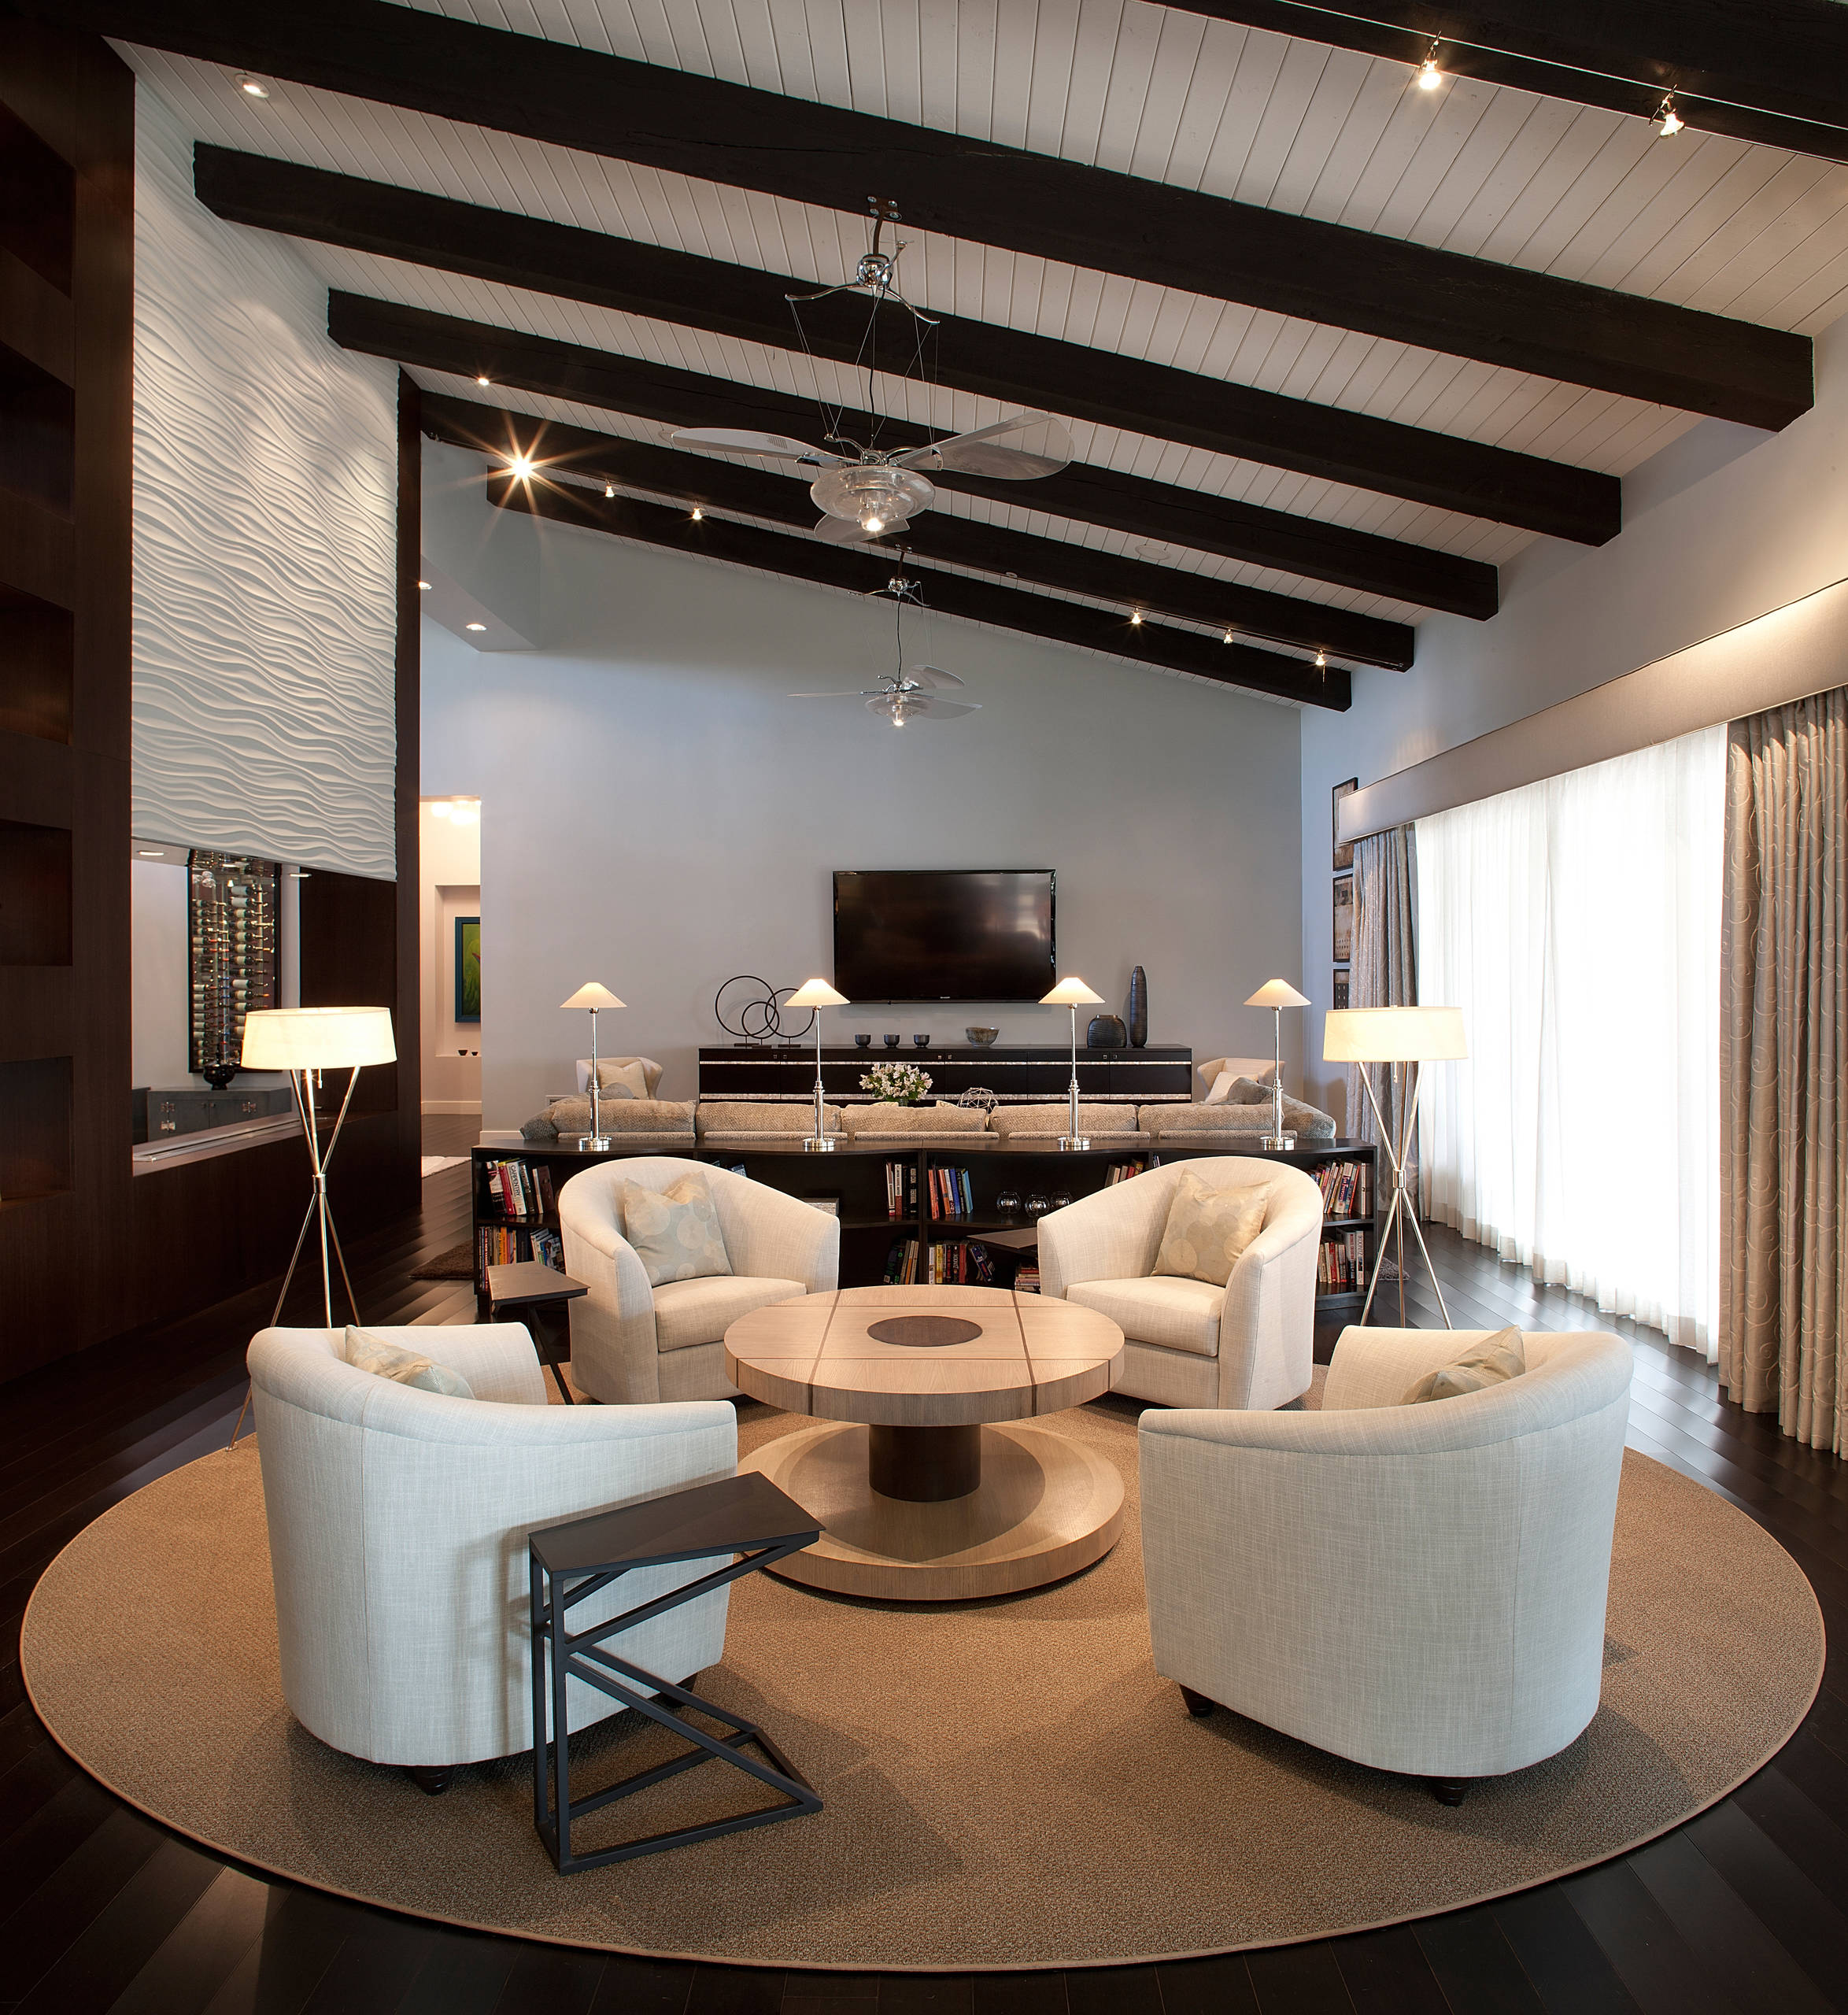 2014 FIRST PLACE WINNER * ASID AWARD - Great Room